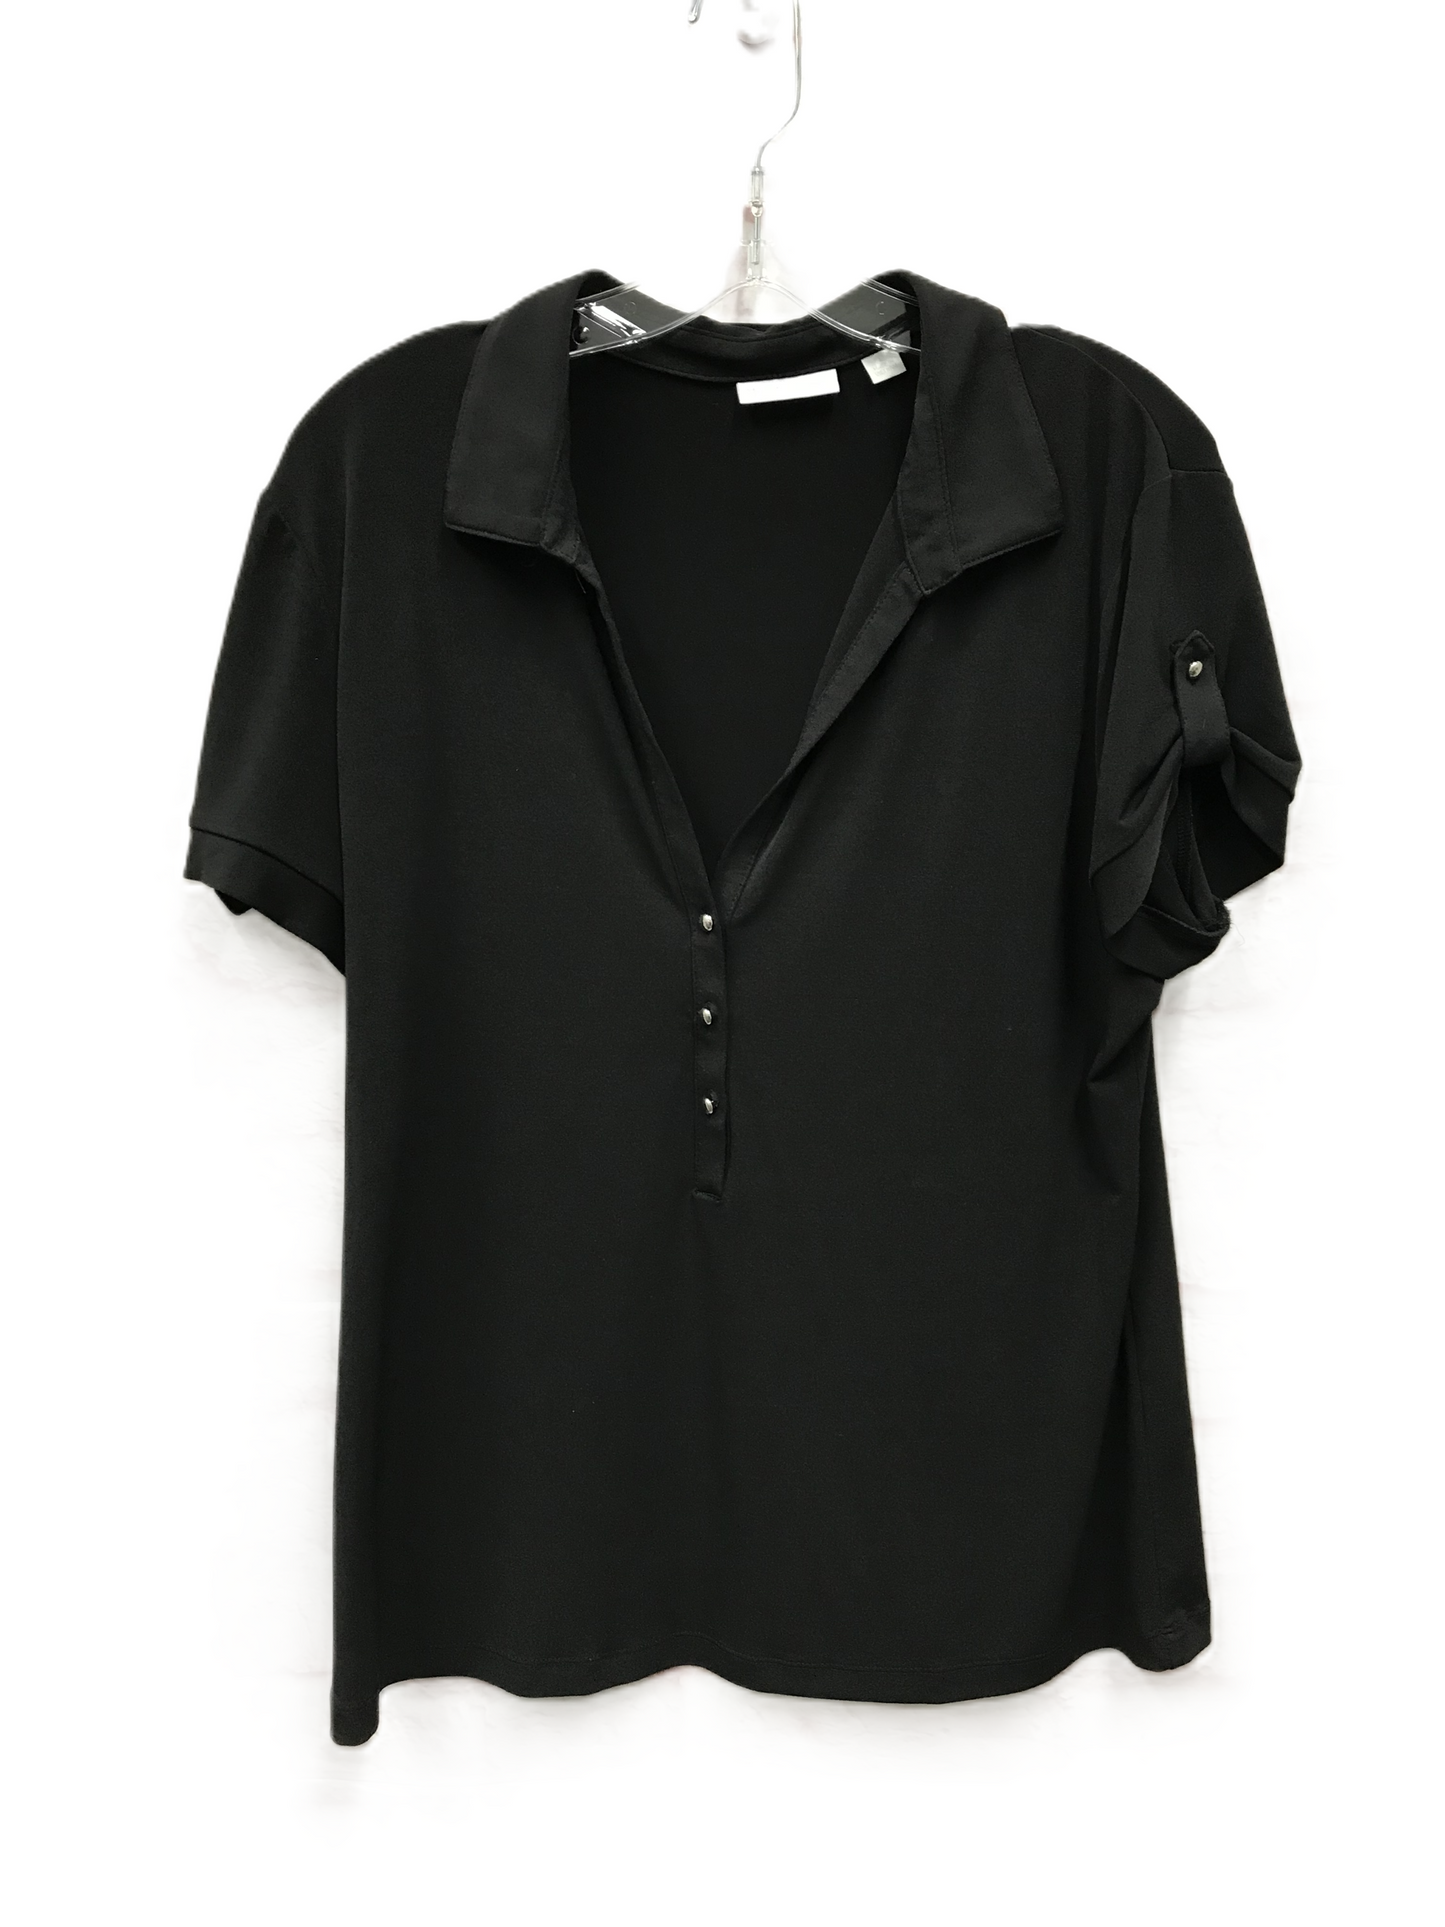 Black Top Short Sleeve By New York And Co, Size: L